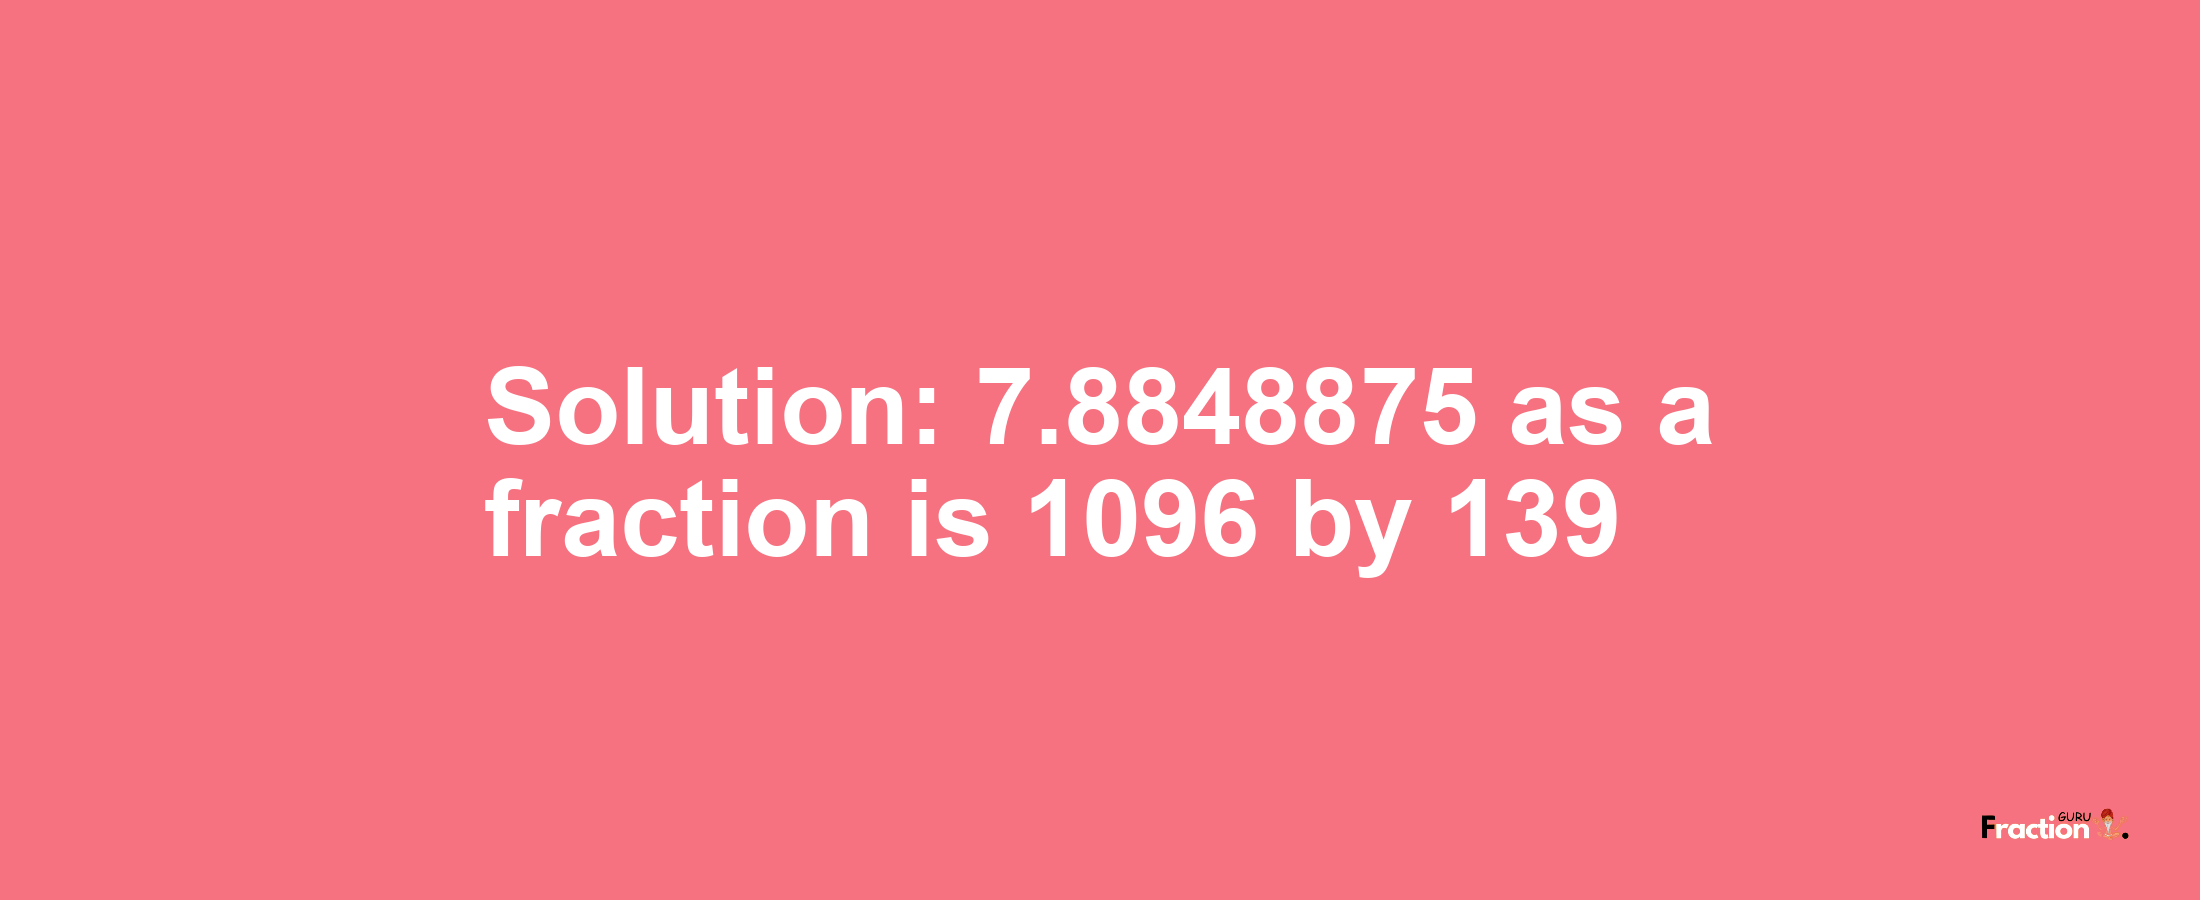 Solution:7.8848875 as a fraction is 1096/139